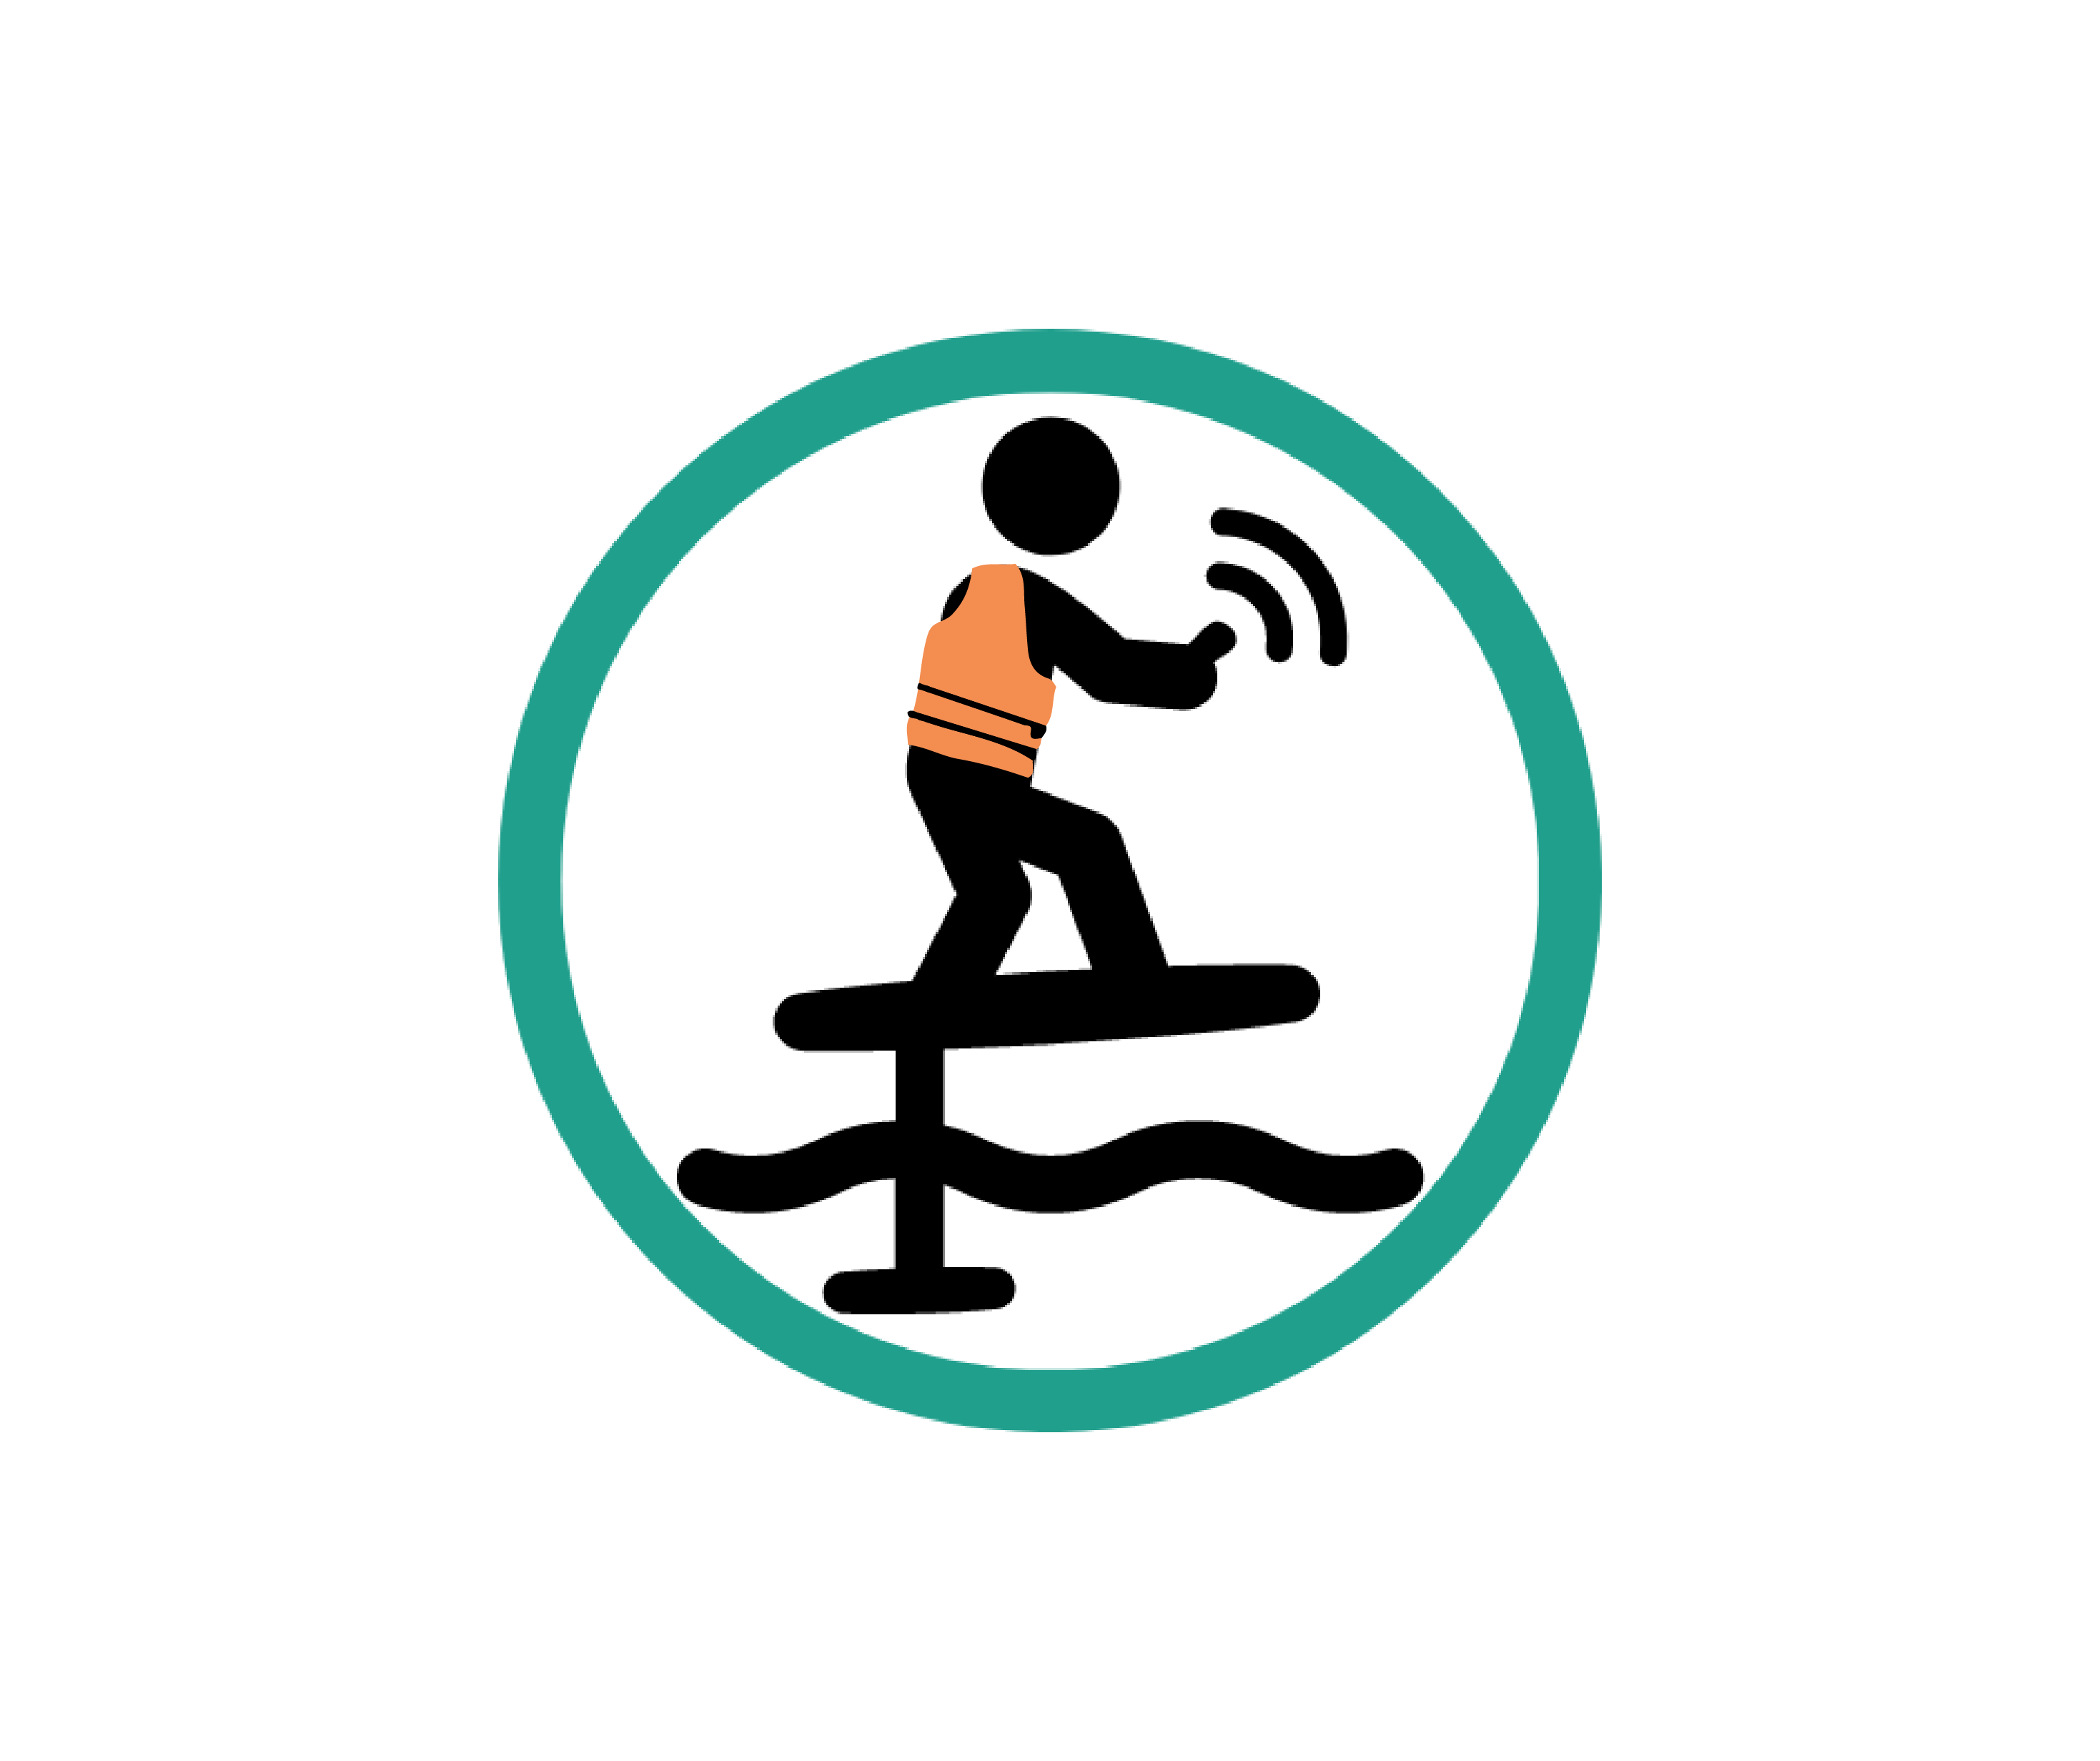 Graphic of a person on an eHydrofoil wearing a life jacket